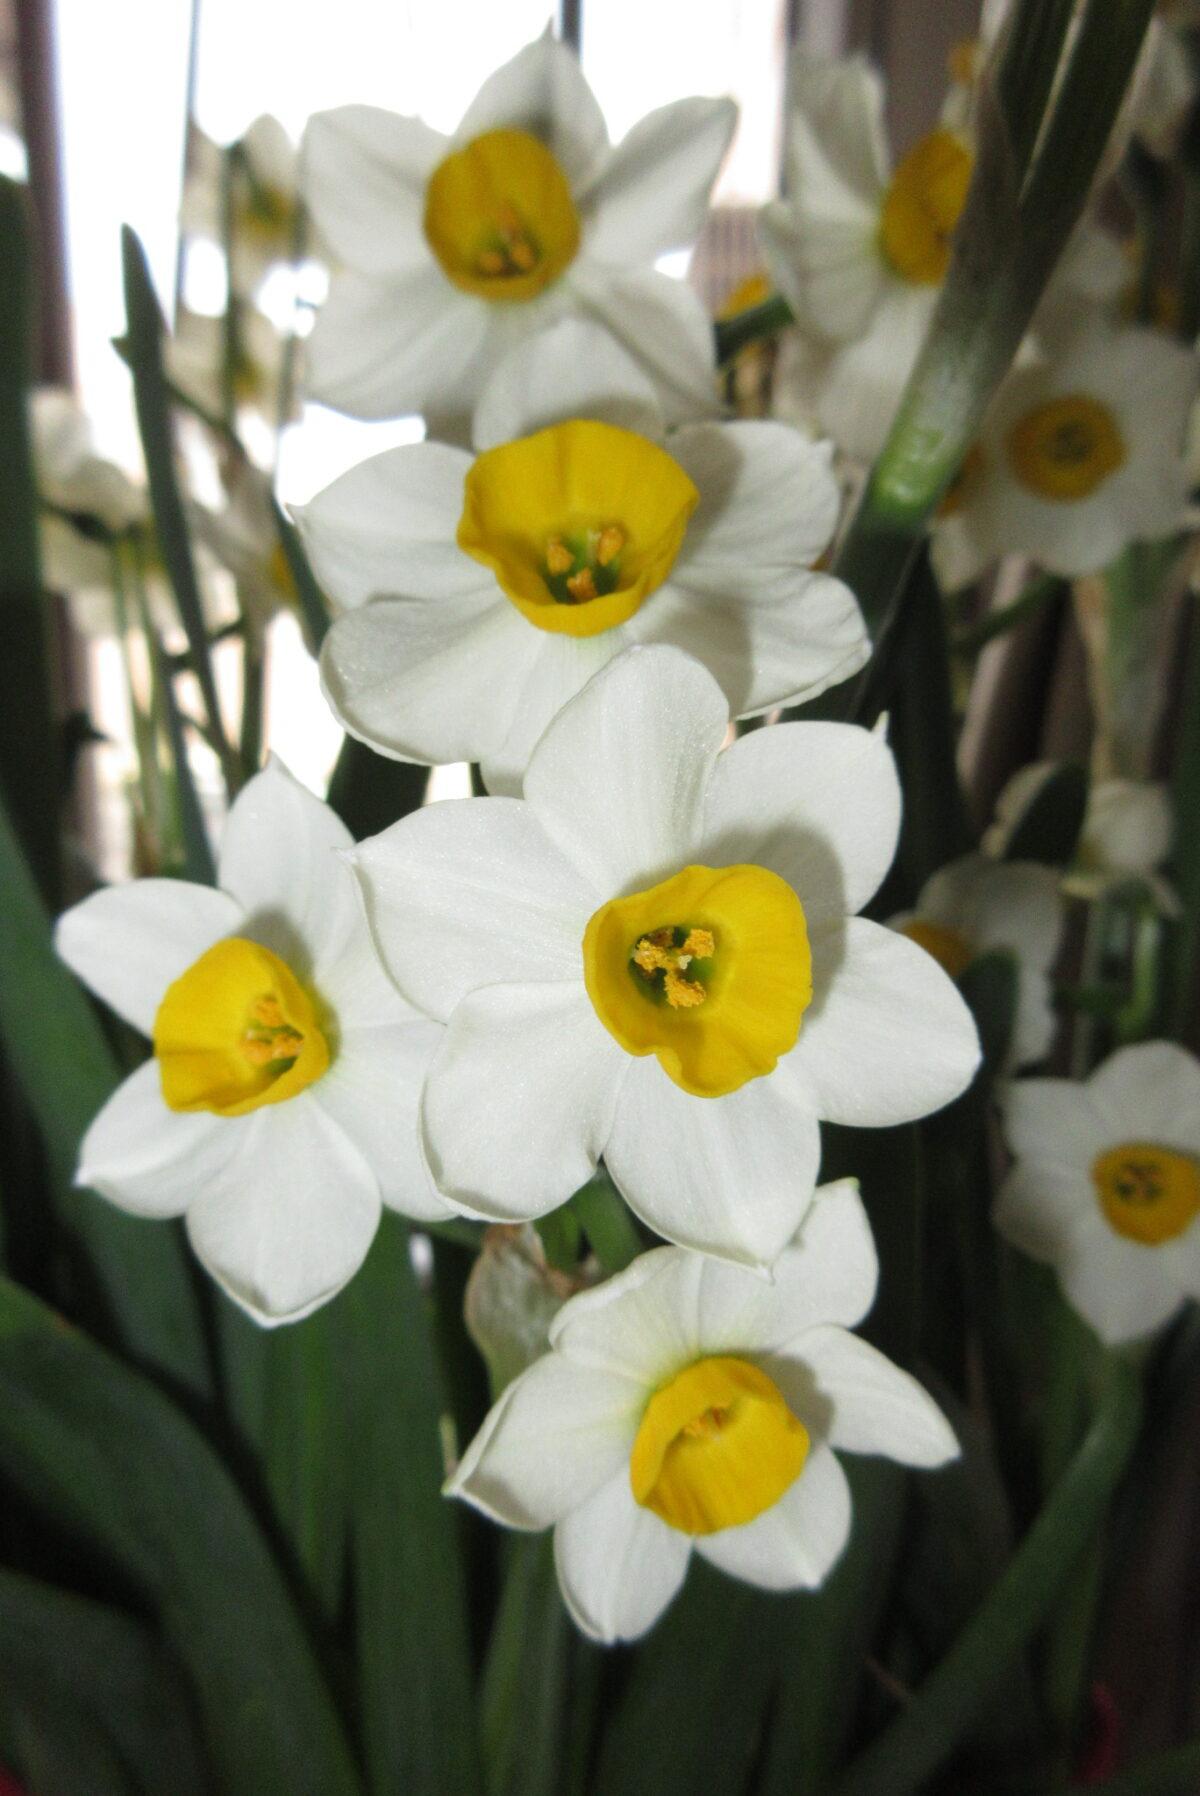 Paperwhite daffodils, also called the Chinese sacred lily, in bloom. A good display of daffodils on Chinese New Year’s Day ensures good fortune for the coming year. (YimOyuanbellshesn, CC BY-SA 4.0)